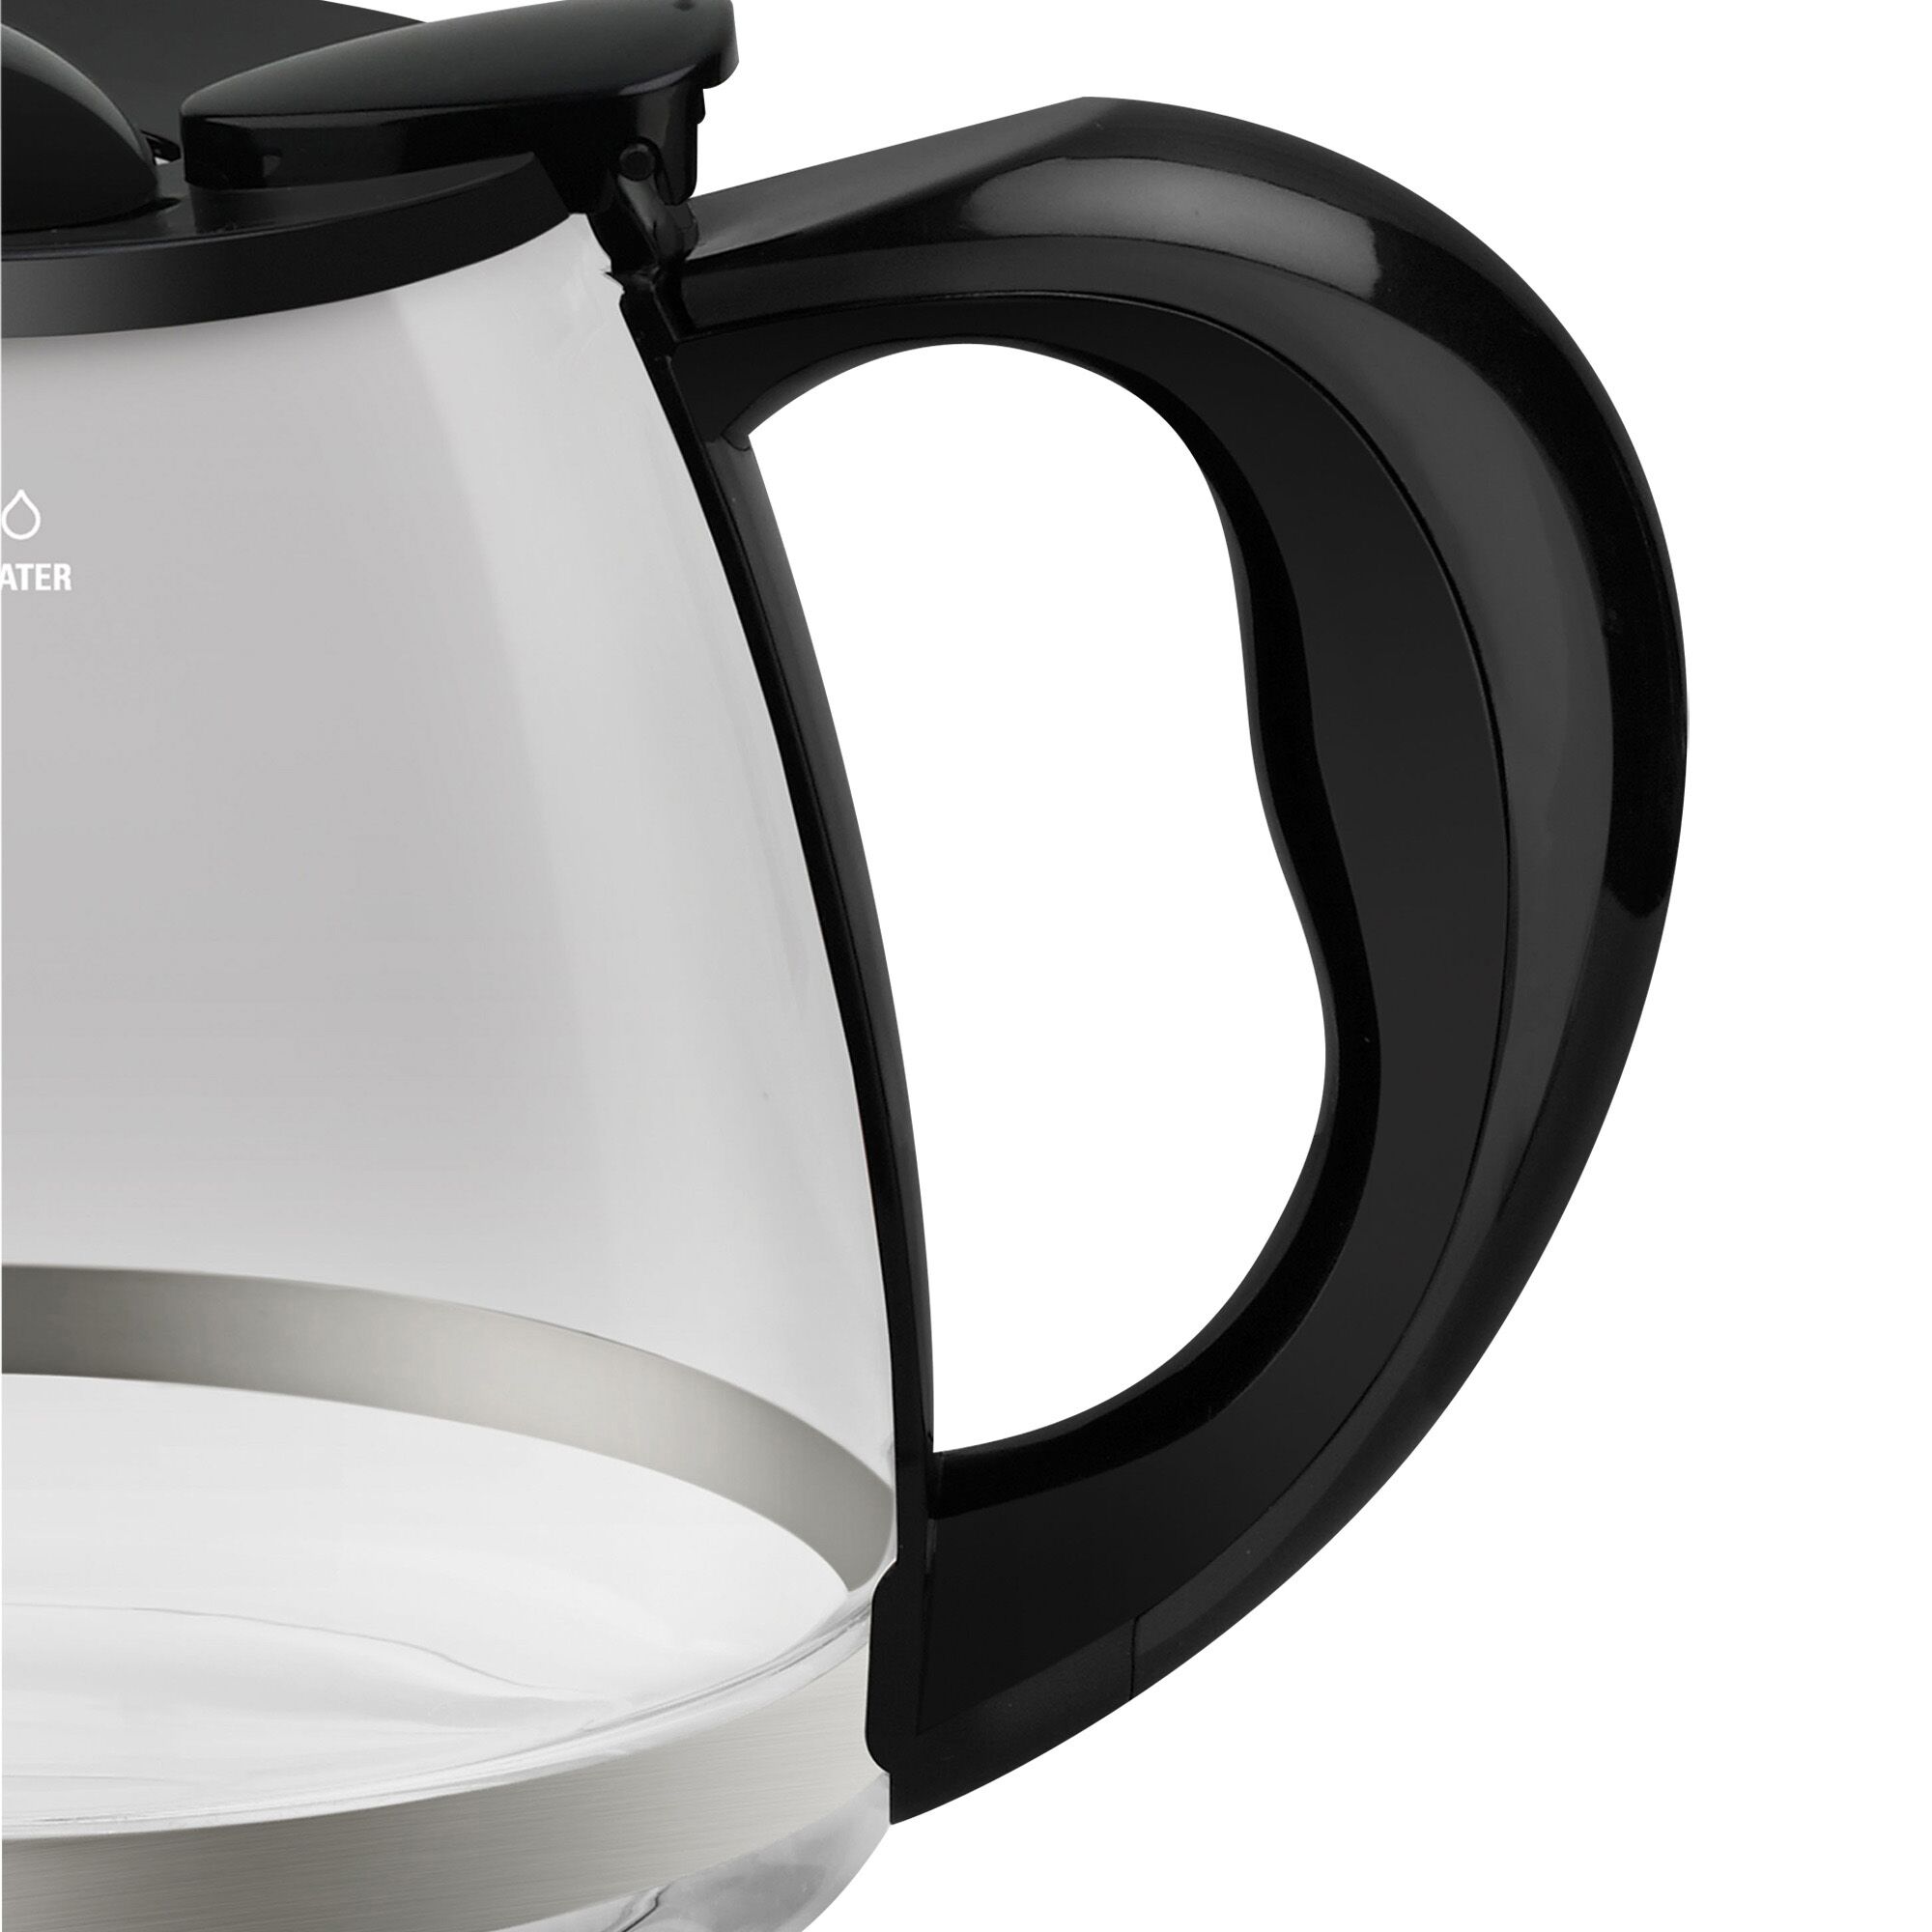 Replacement Carafe with Sturdy handle.